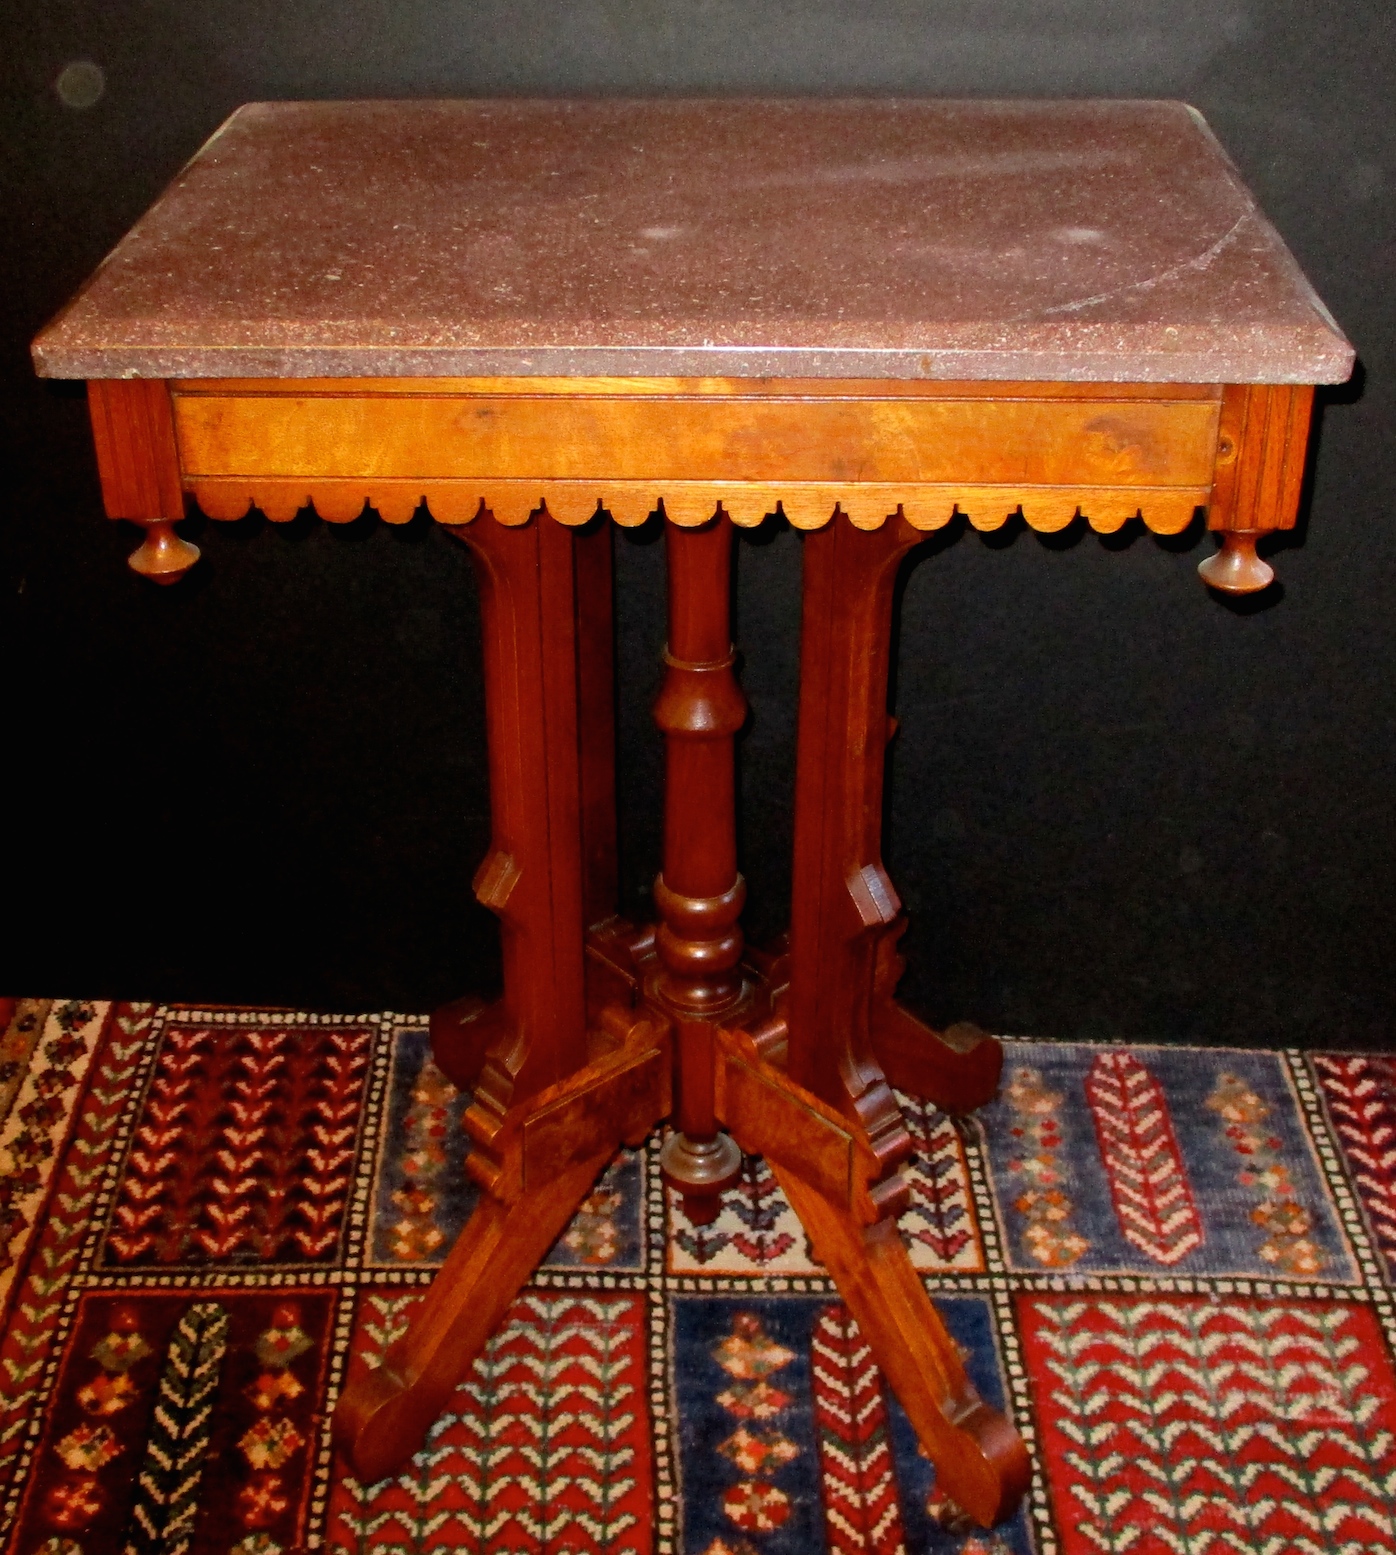 Ca.1880 American Aesthetic Walnut Table w/Marble Top